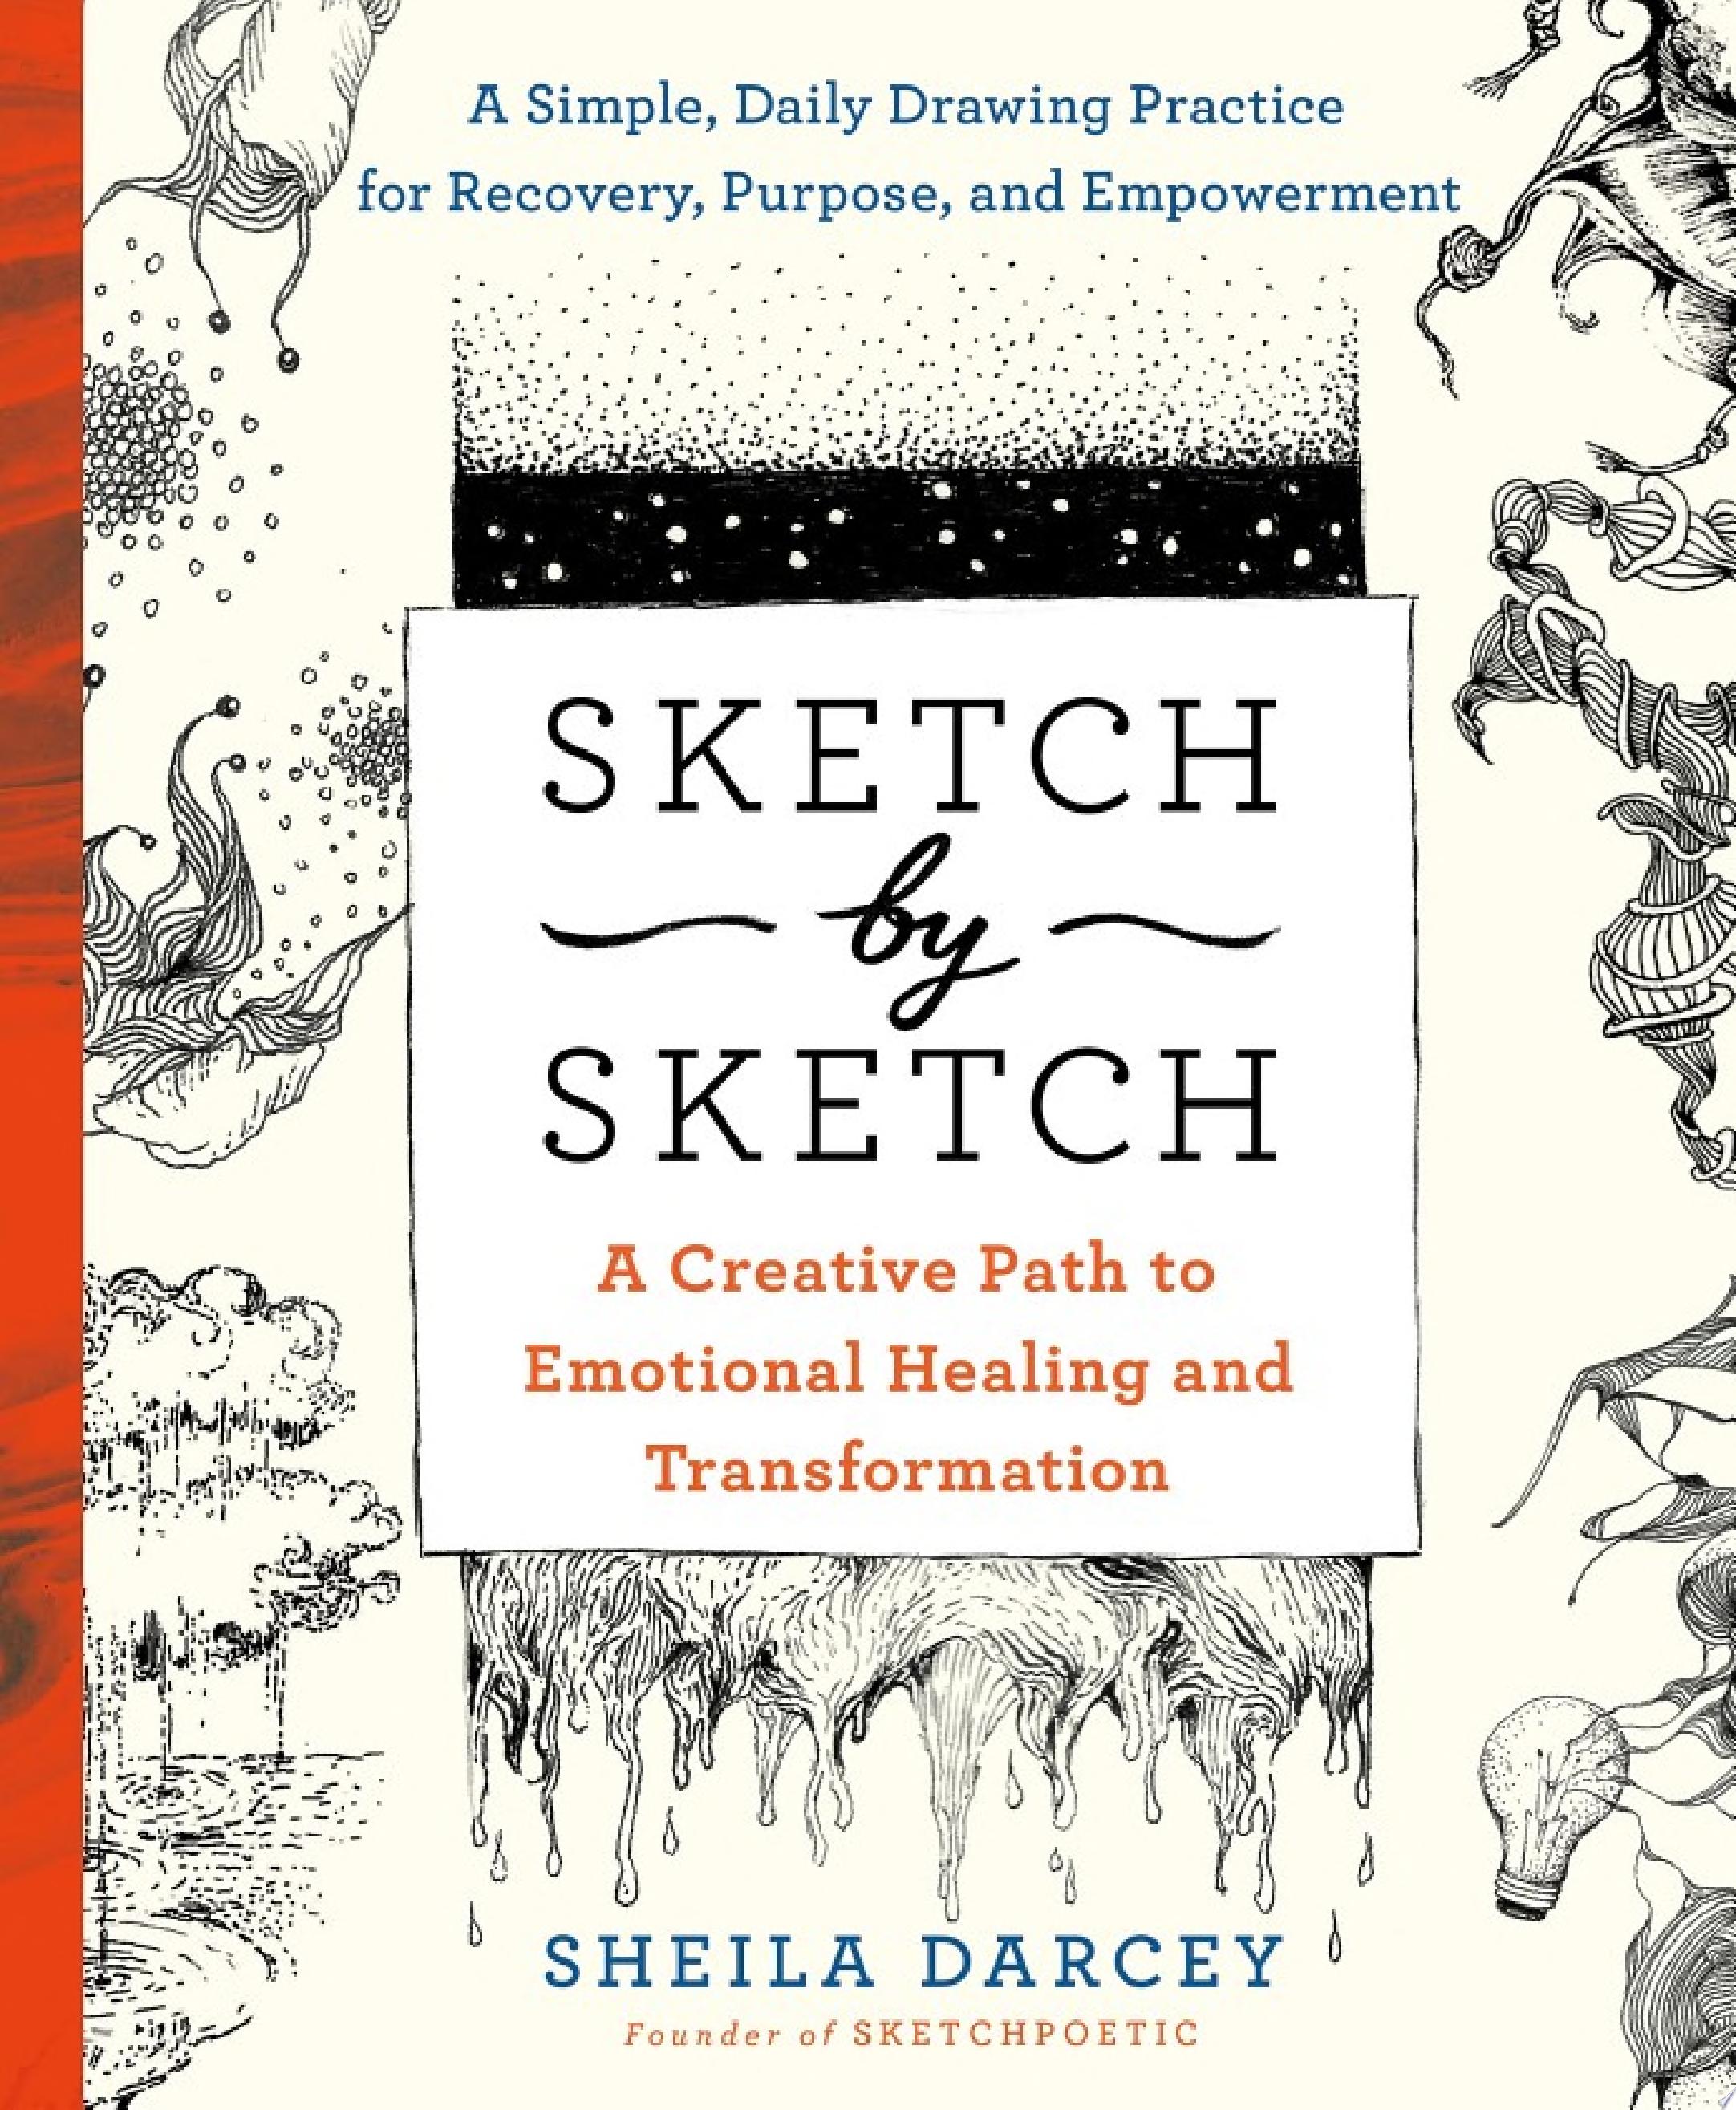 Image for "Sketch by Sketch"